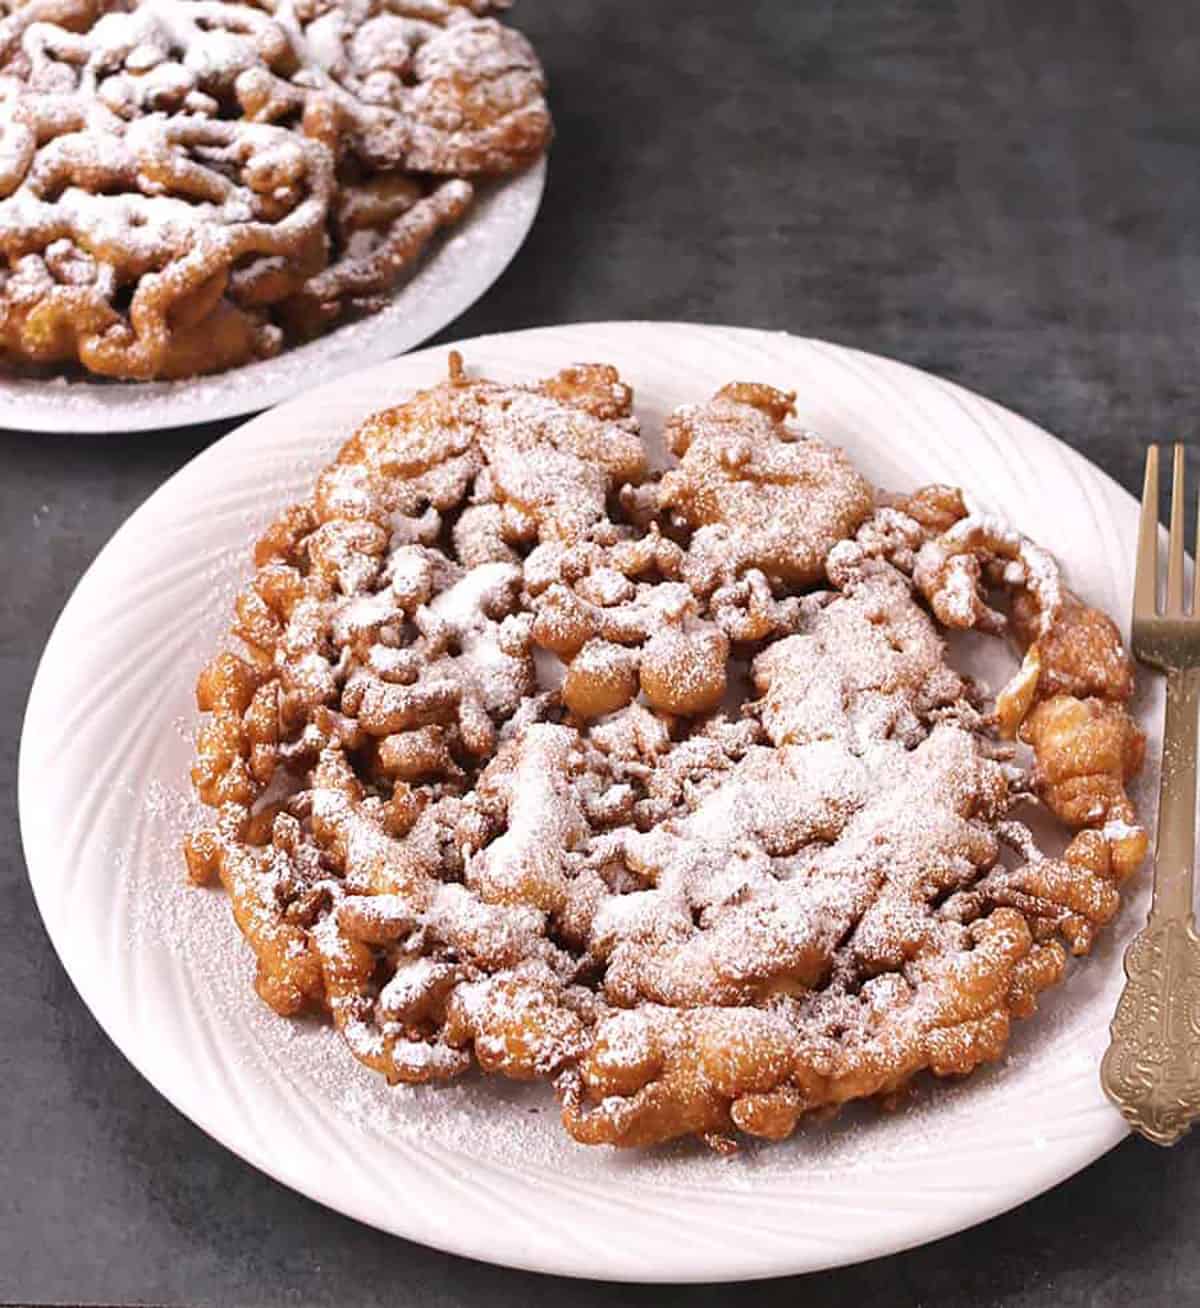 Big crispy funnel cake served on a plate that is topped with confectioners sugar